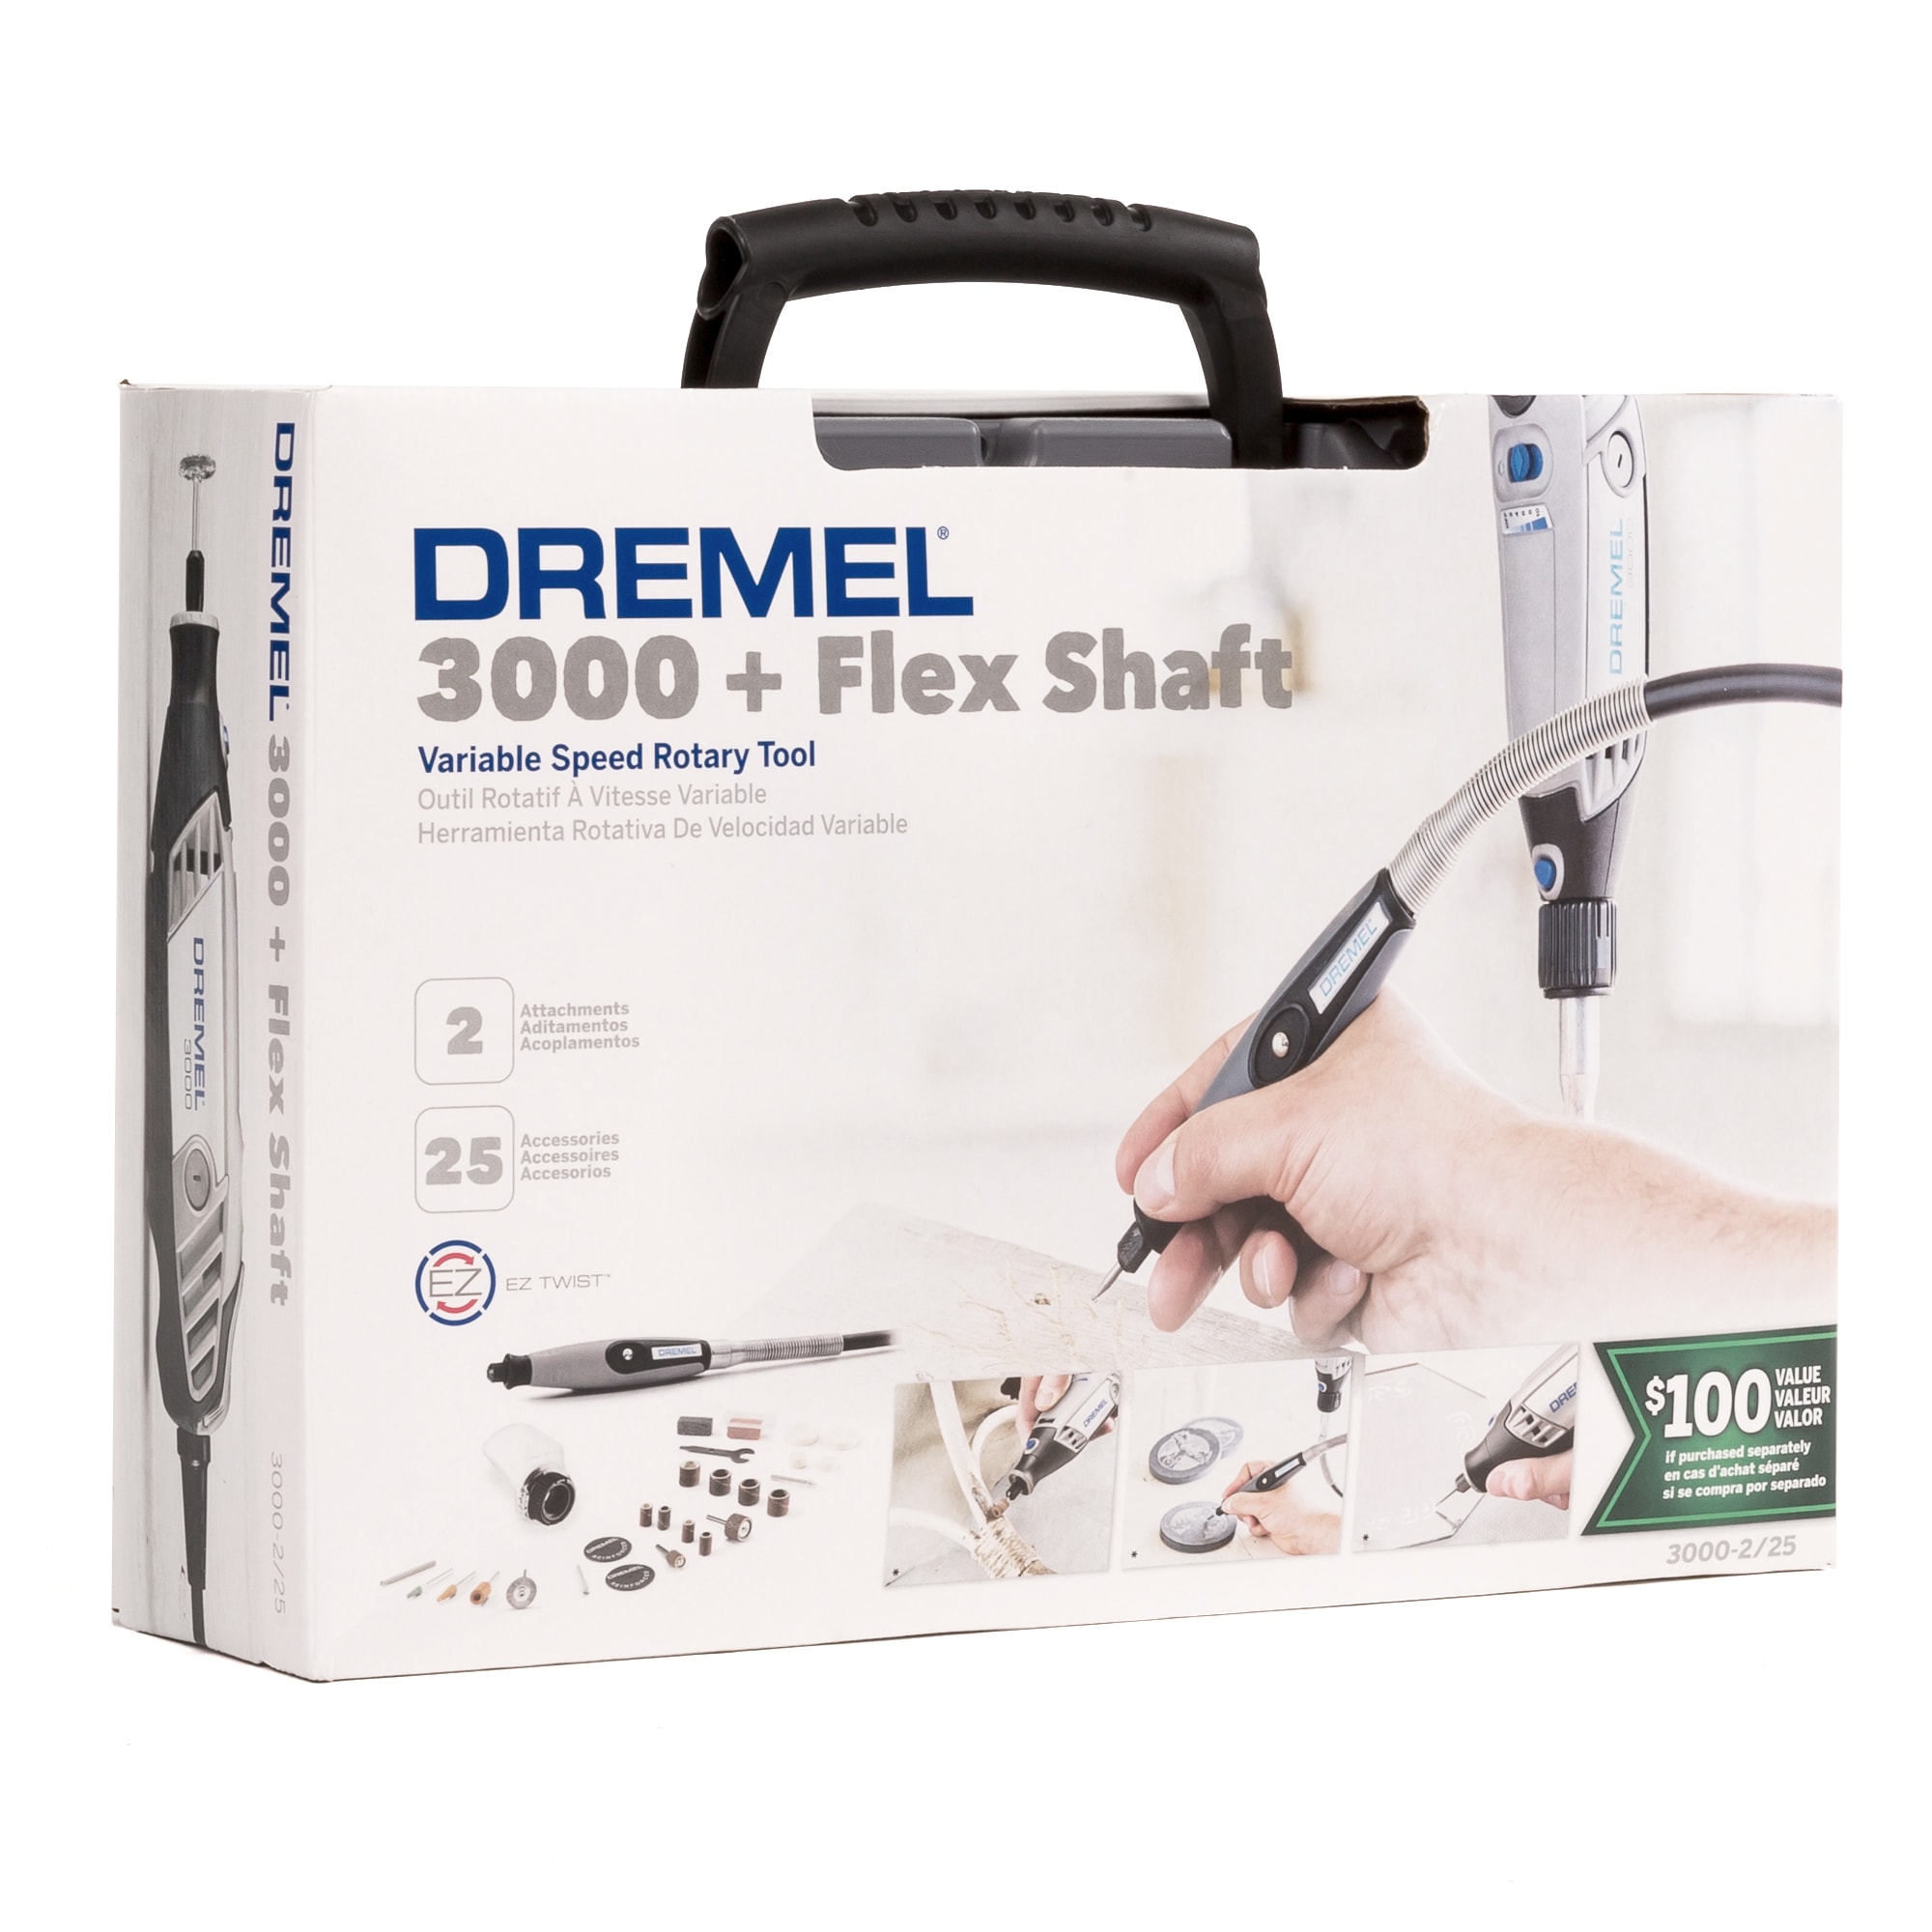 Dremel Stylo+ Variable Speed Corded 0.5-Amp Crafting Rotary Tool Kit